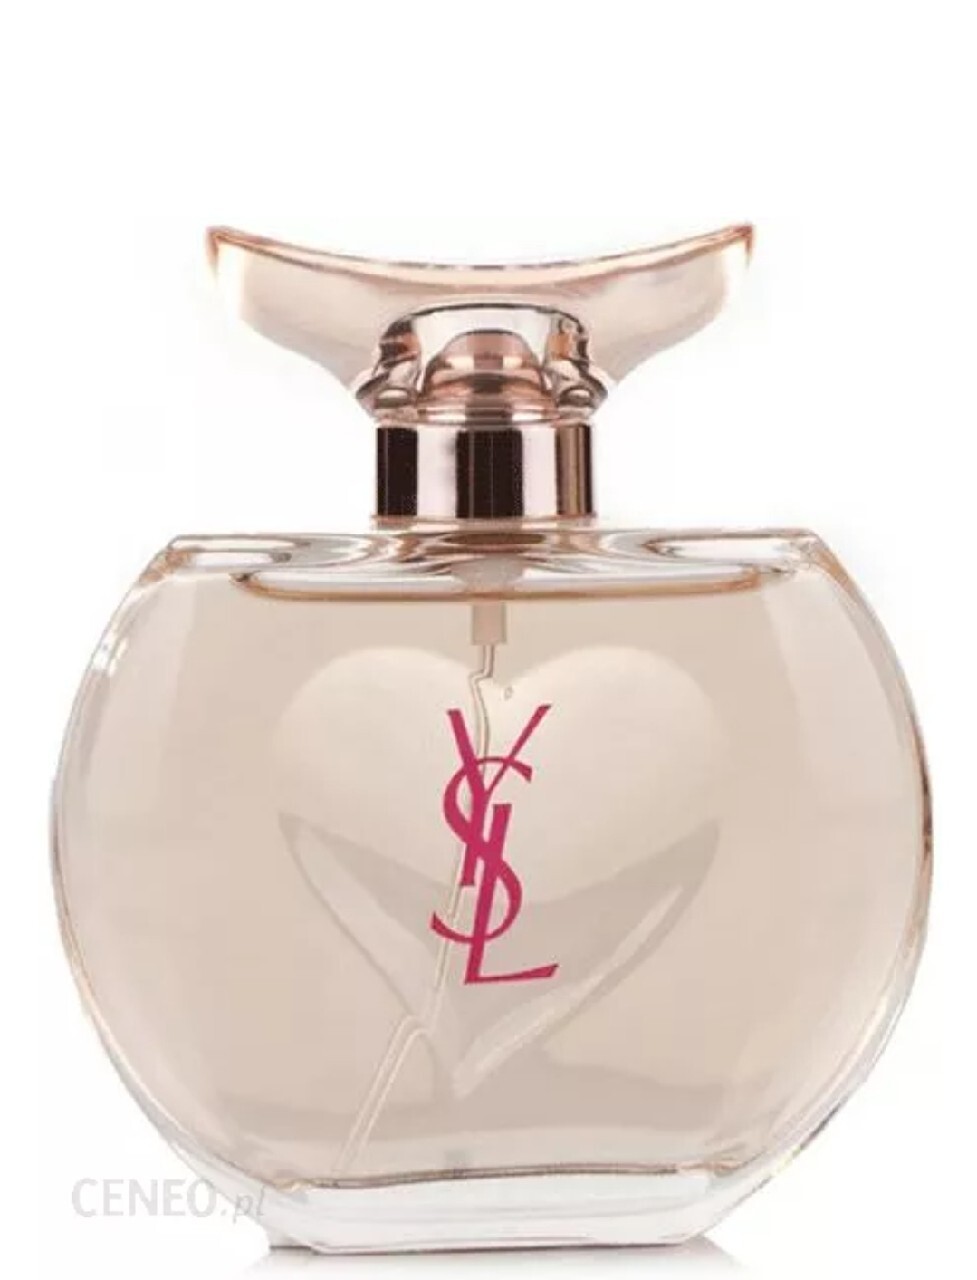 Zdjęcie oferty: Yves Saint Laurent Young Sexy Lovely Woman 100ml